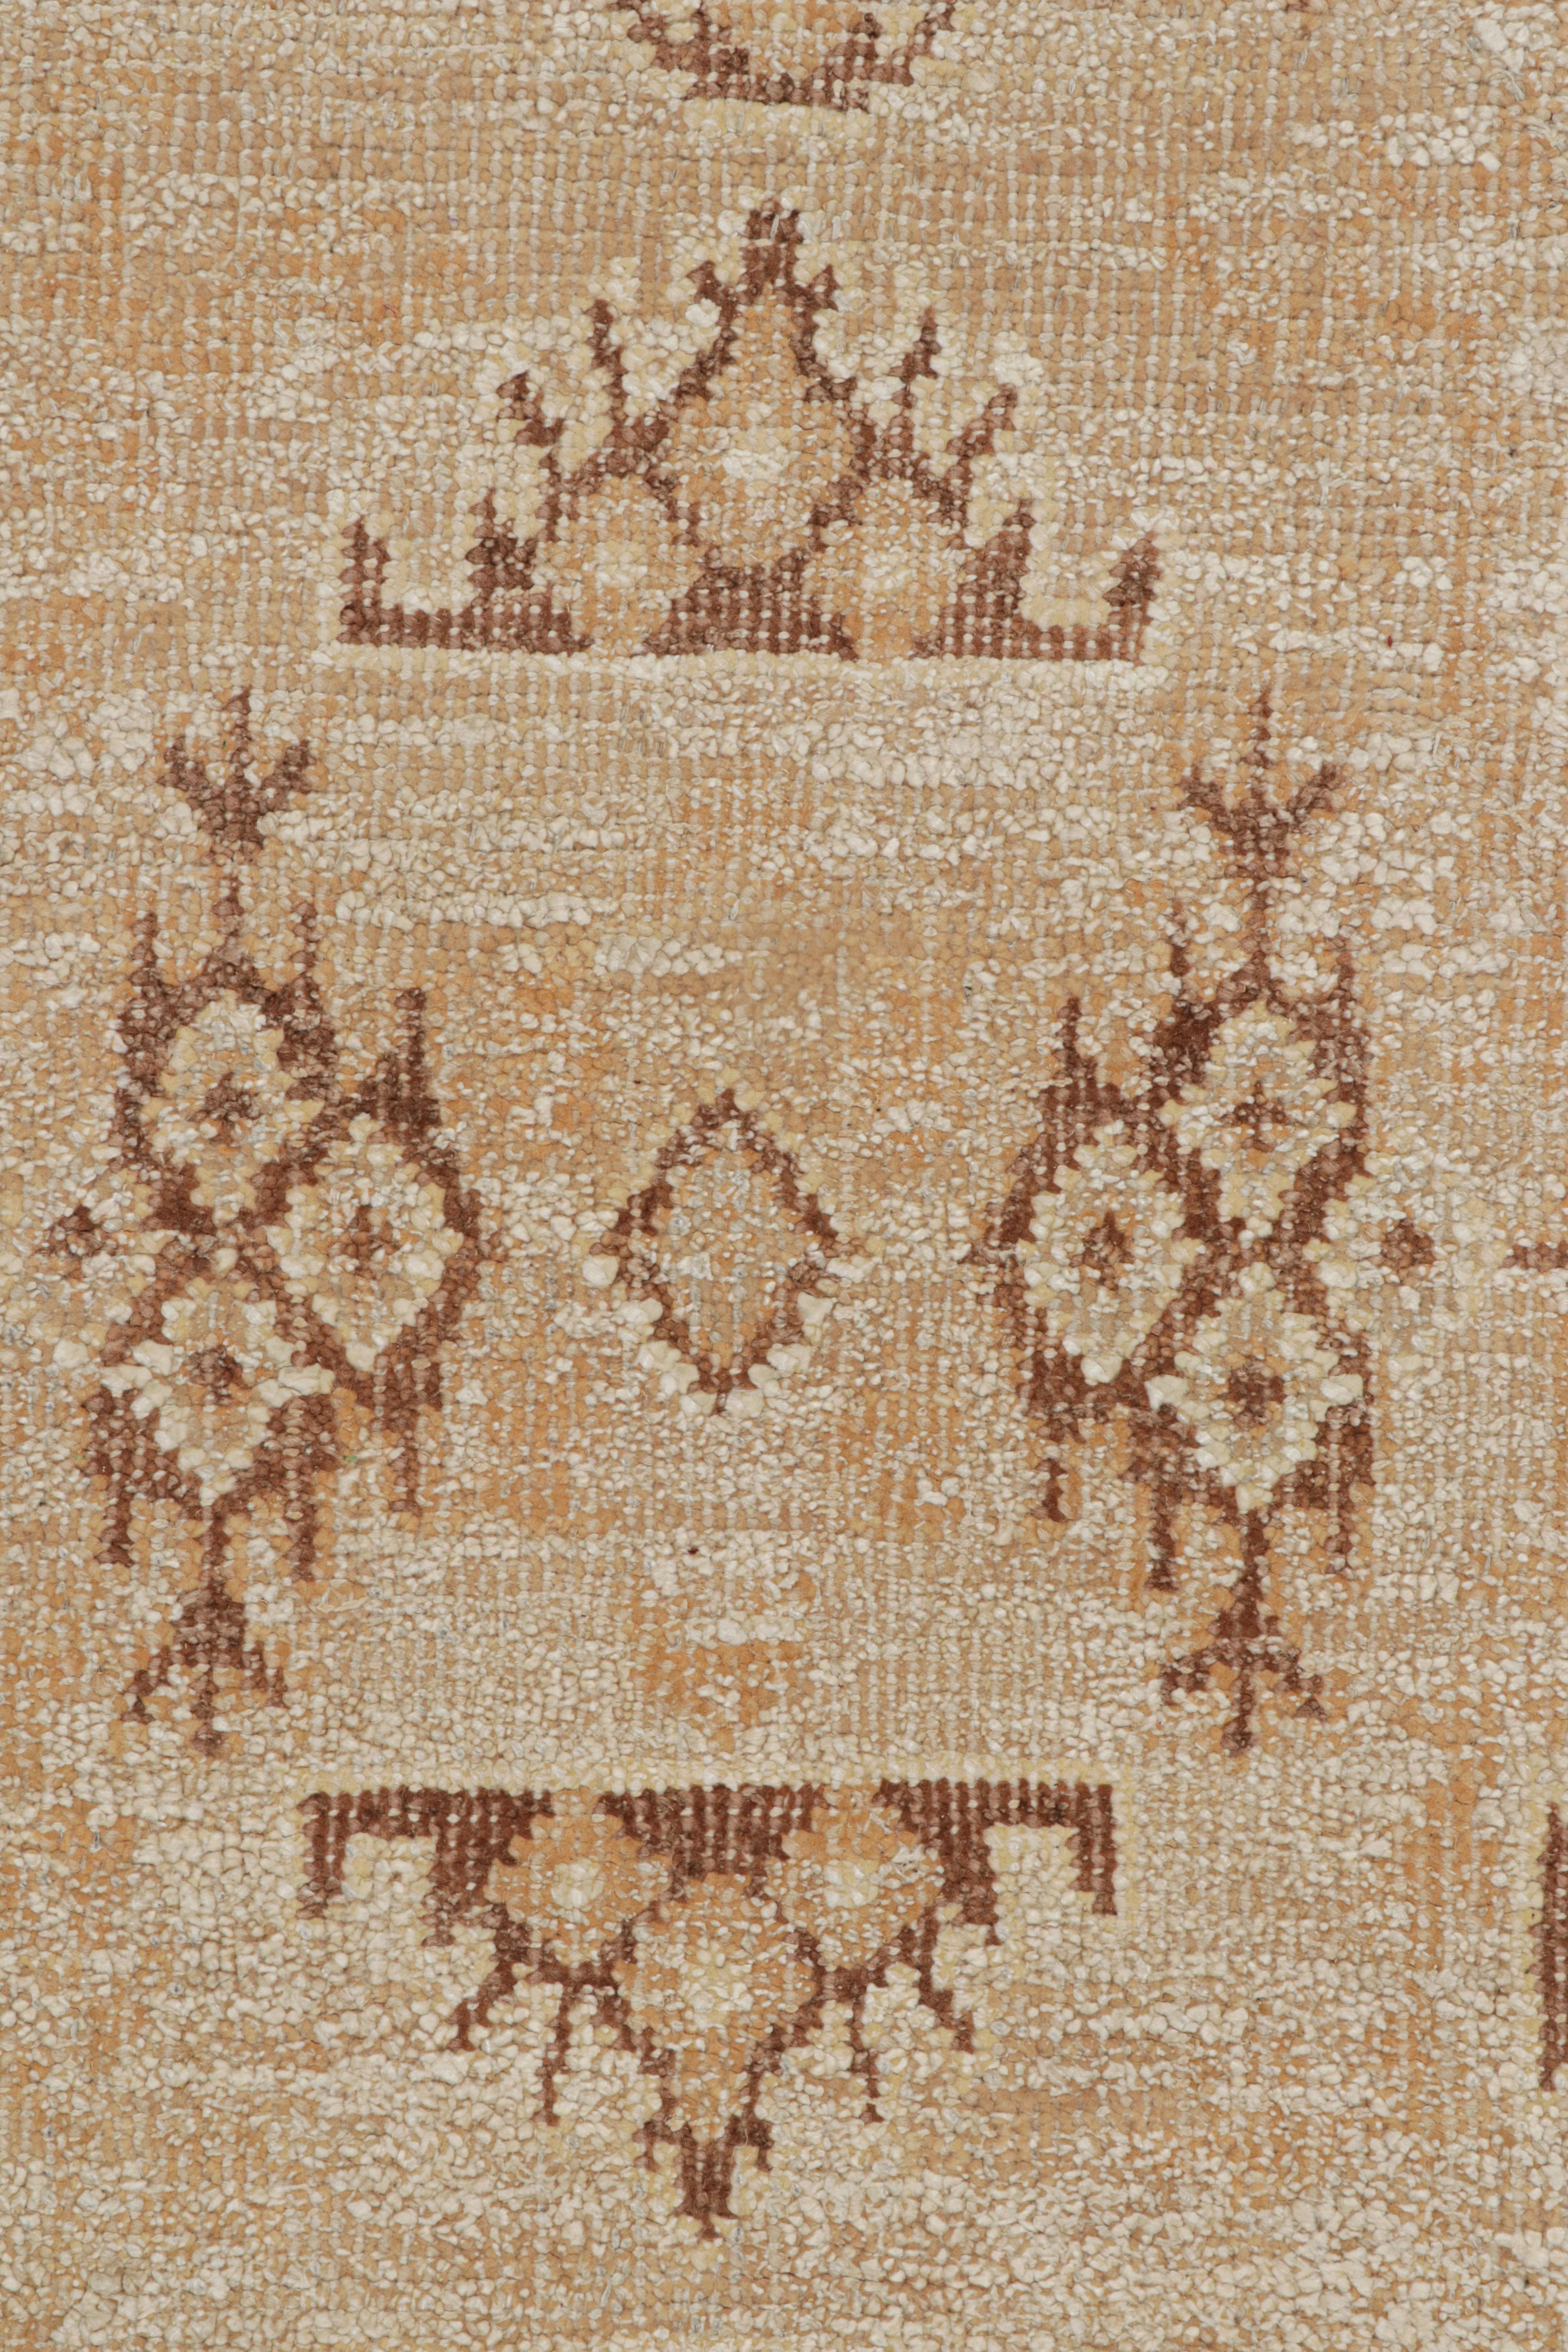 Contemporary Rug & Kilim’s Oushak Style Rug In Beige-Brown and Orange Geometric Pattern For Sale